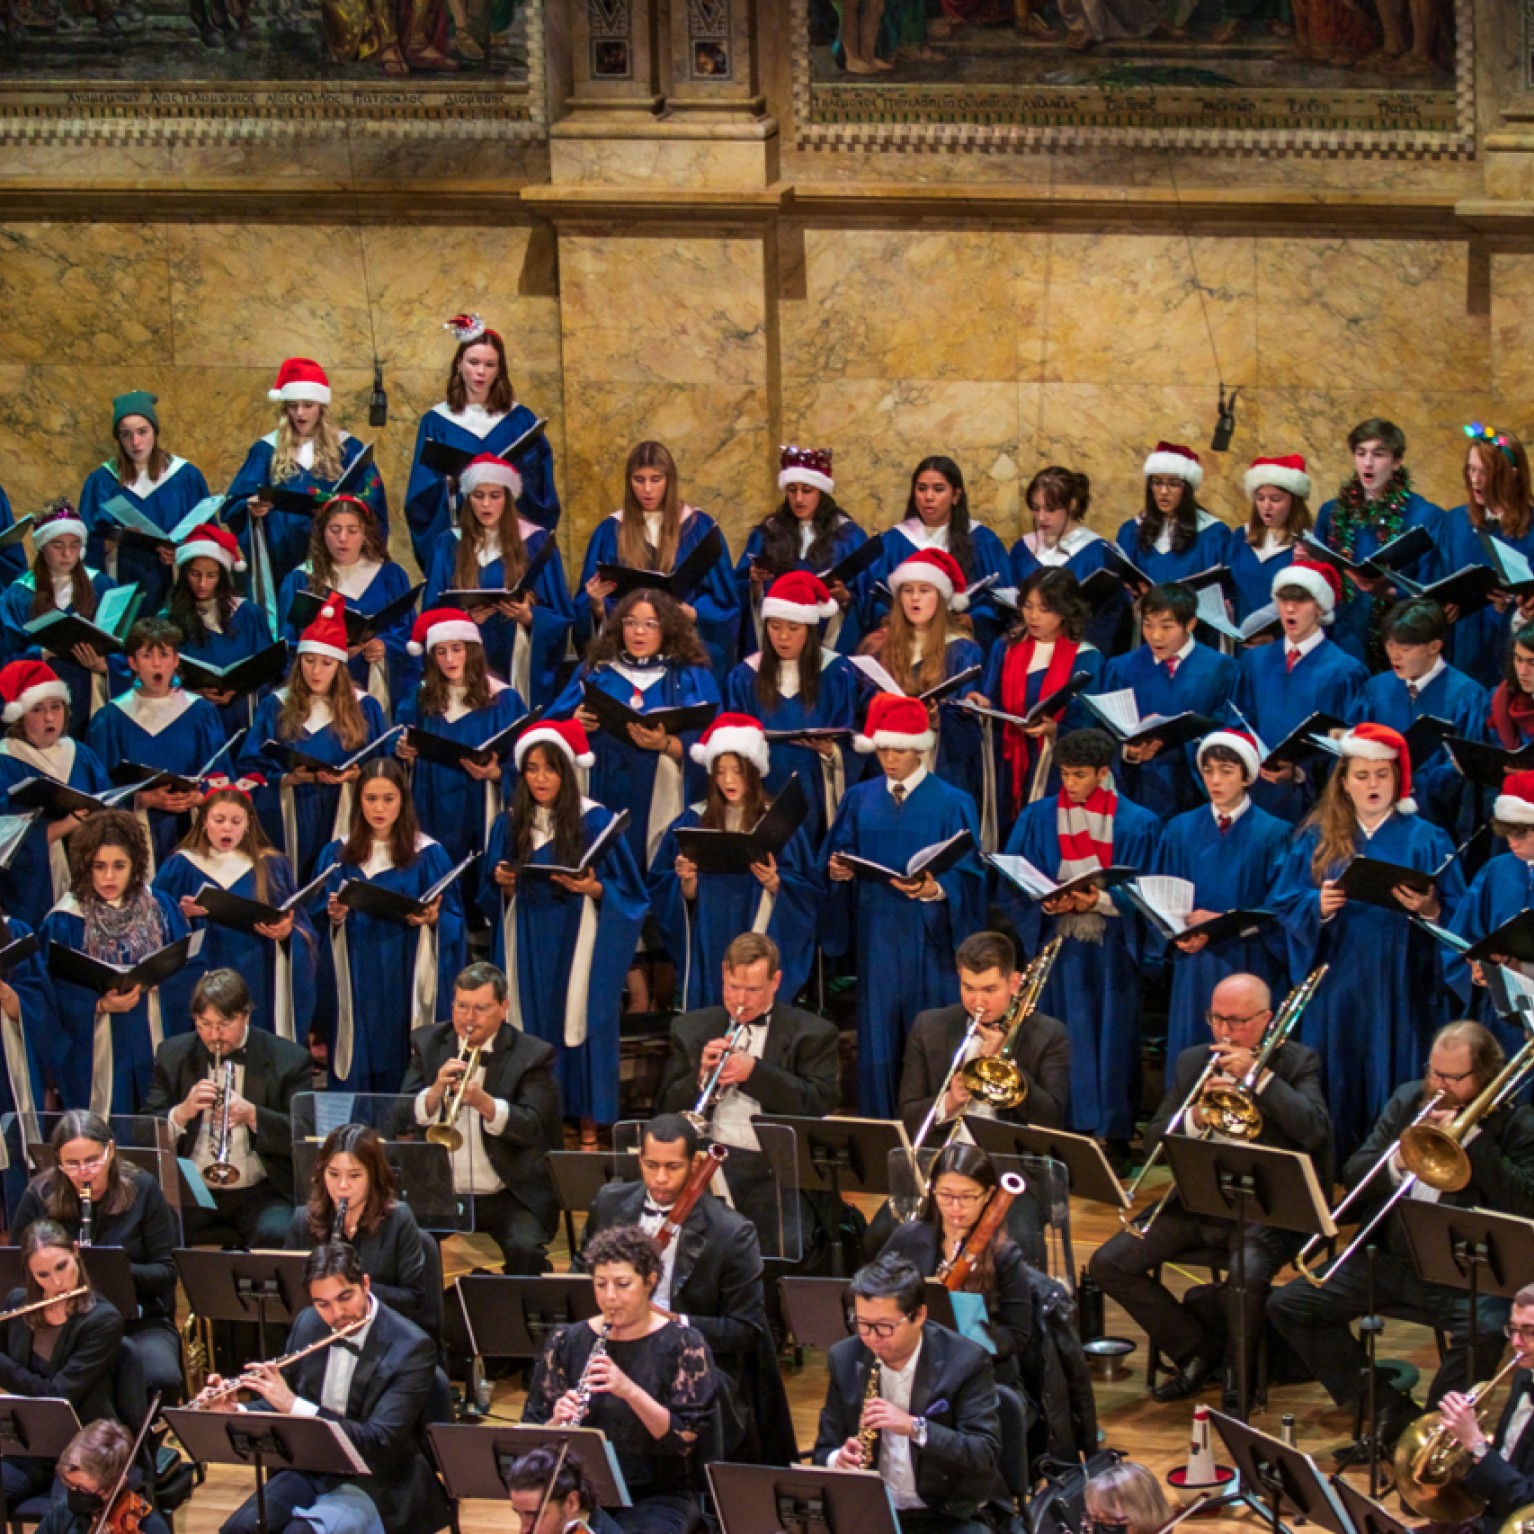 Choir in blue robes and holiday accessories singing onstage 